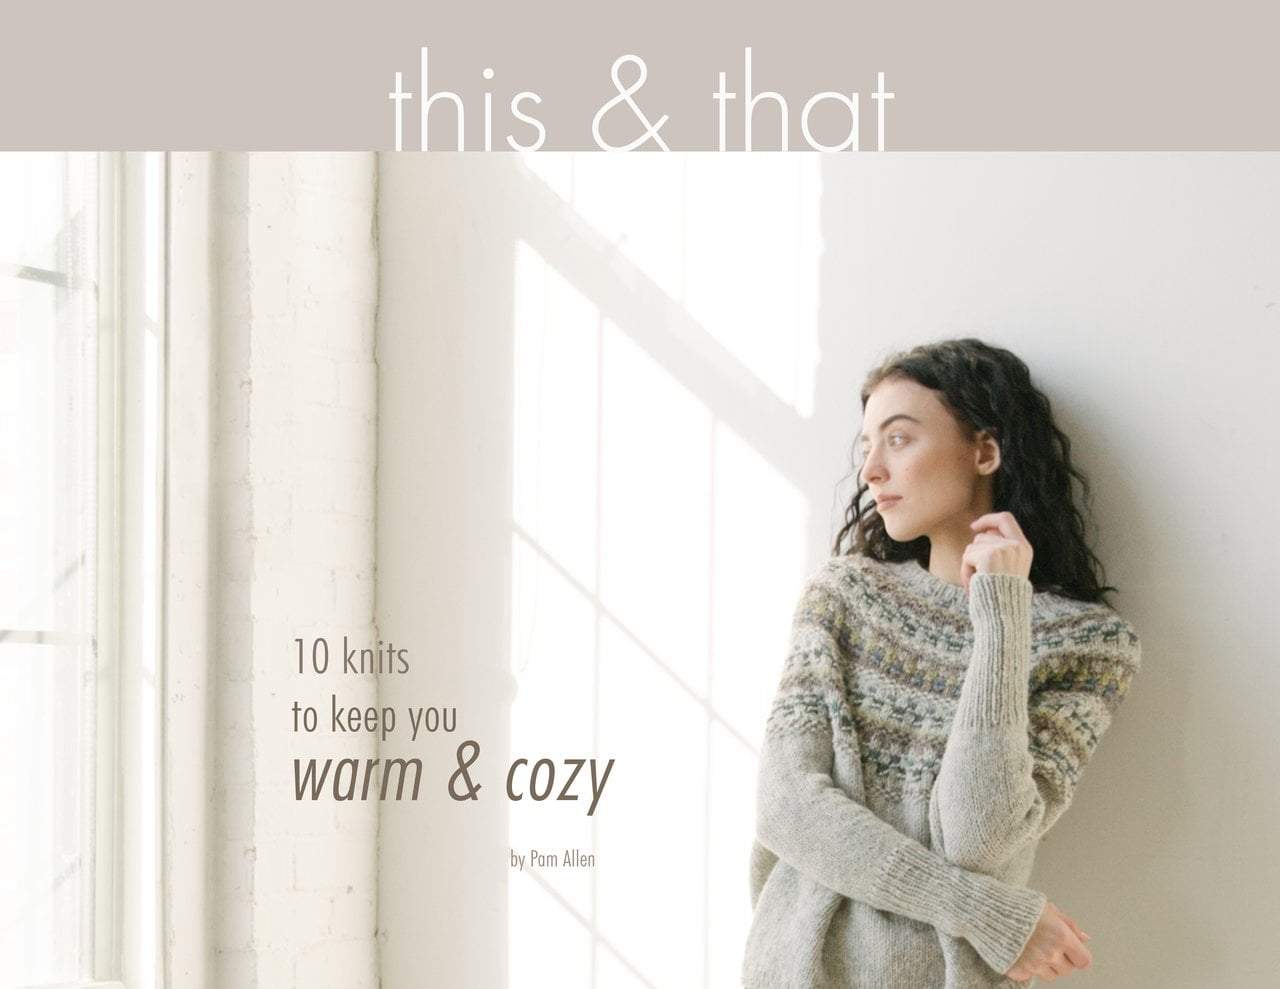 7 More Knitting Words to Keep You Warm